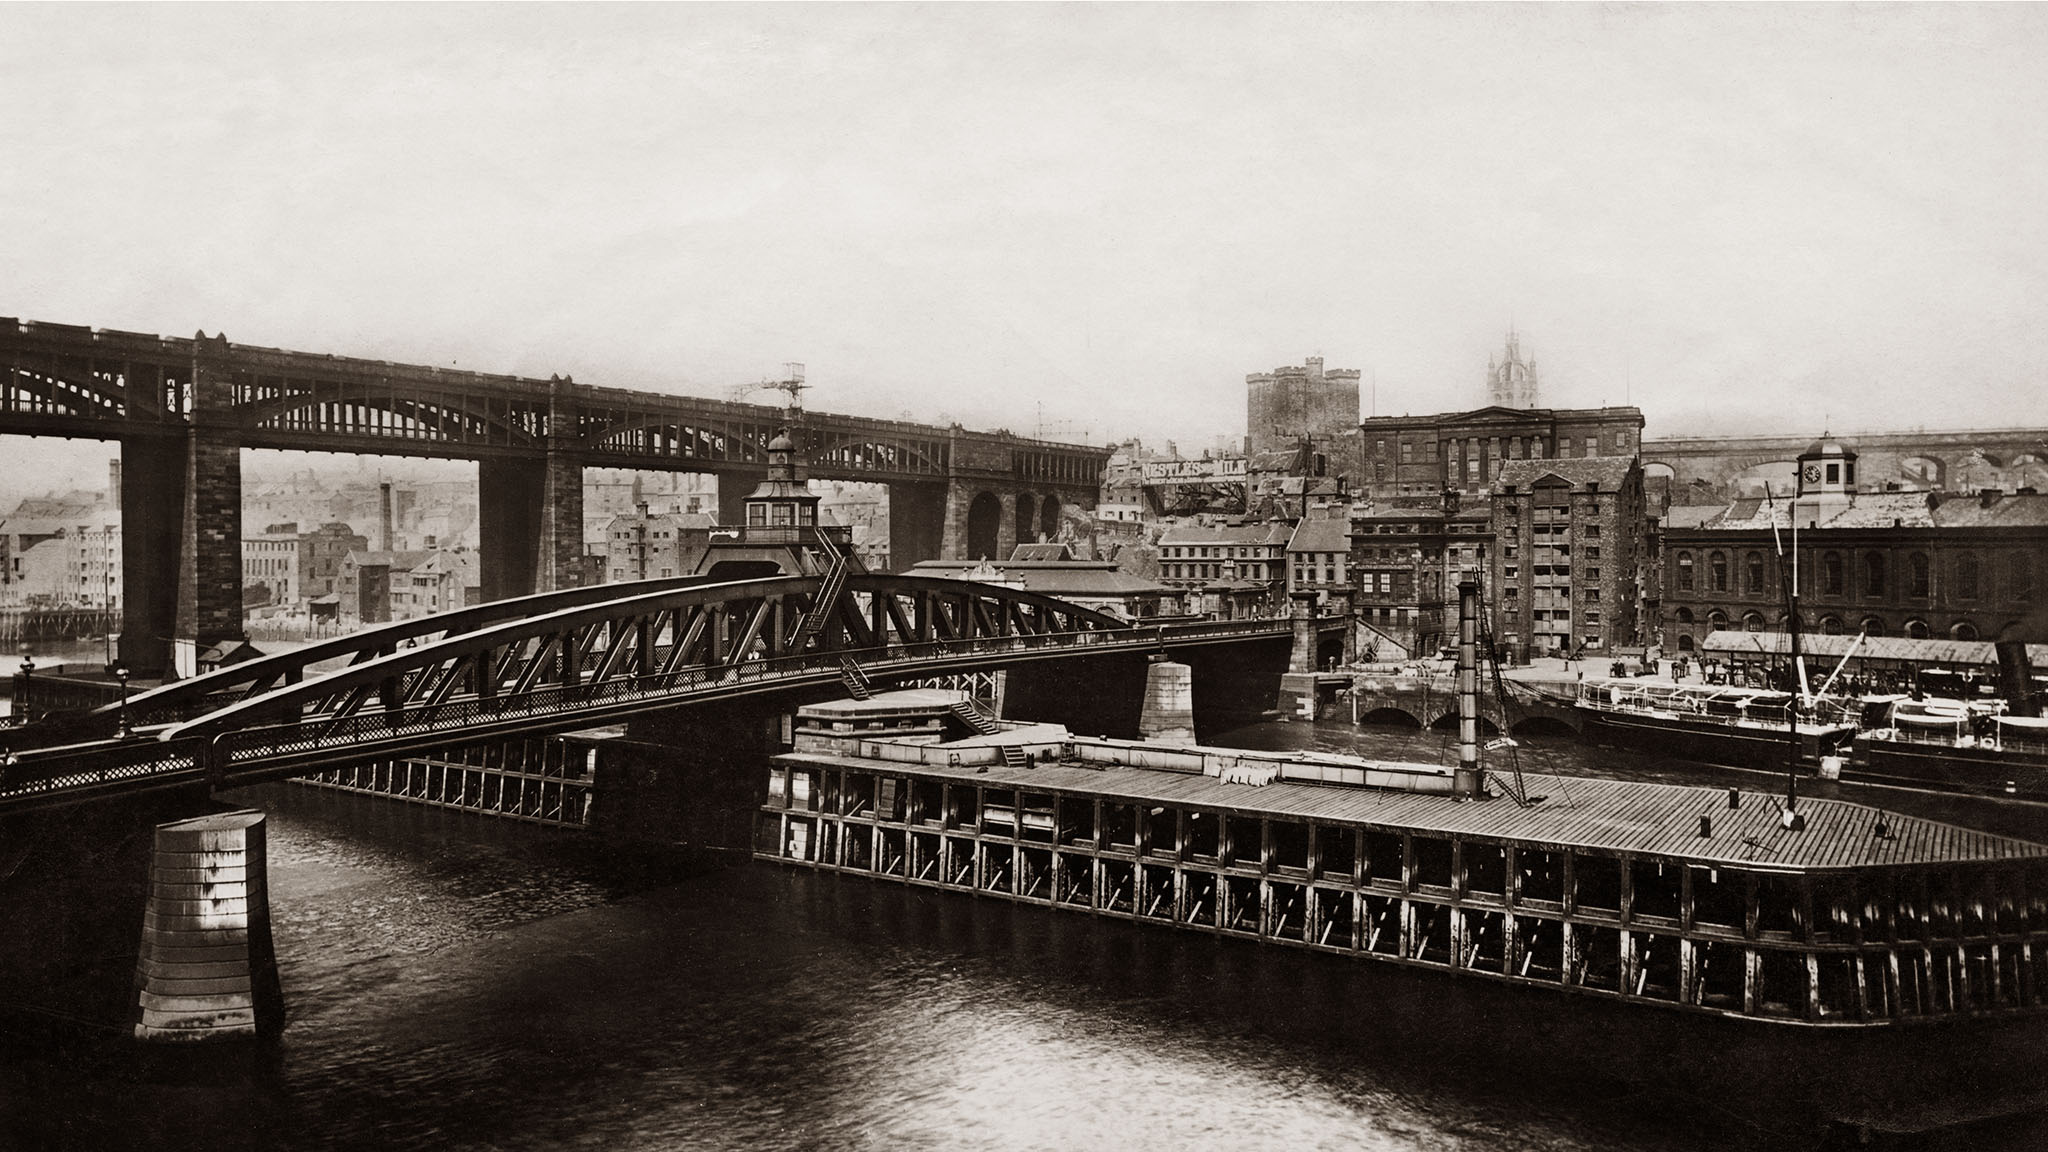 Archive sepia image showing a river with two bridges and a city beyond.